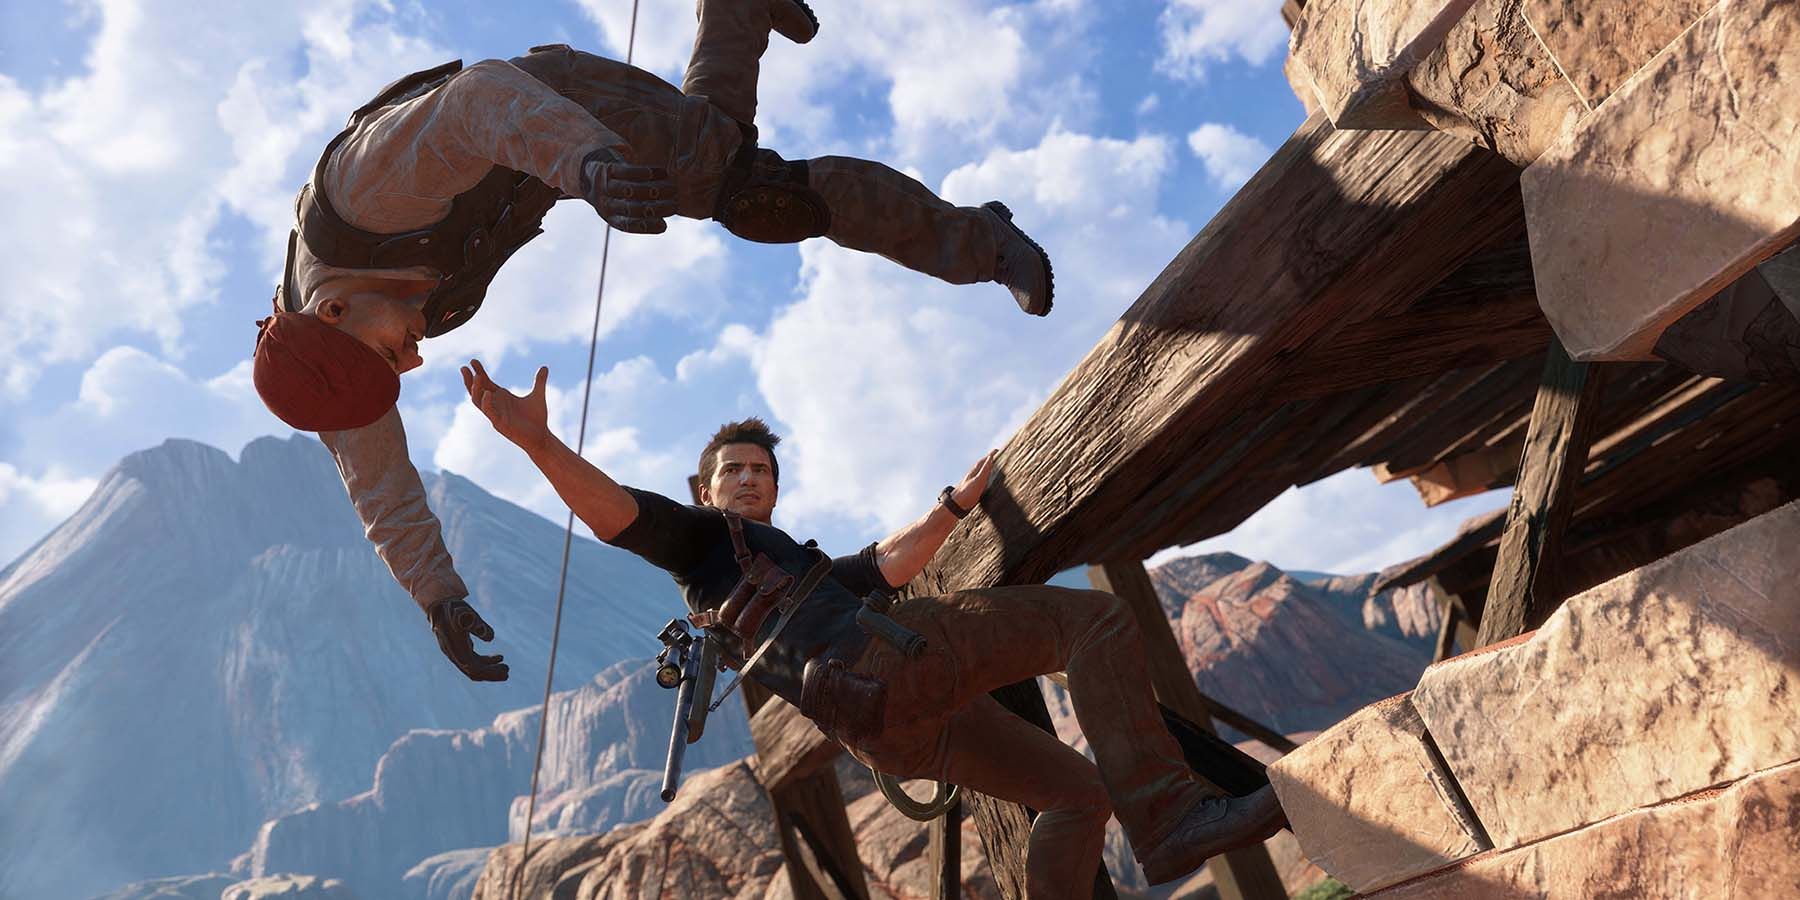 Nathan Drake tossing an enemy off a ledge in Uncharted 4.